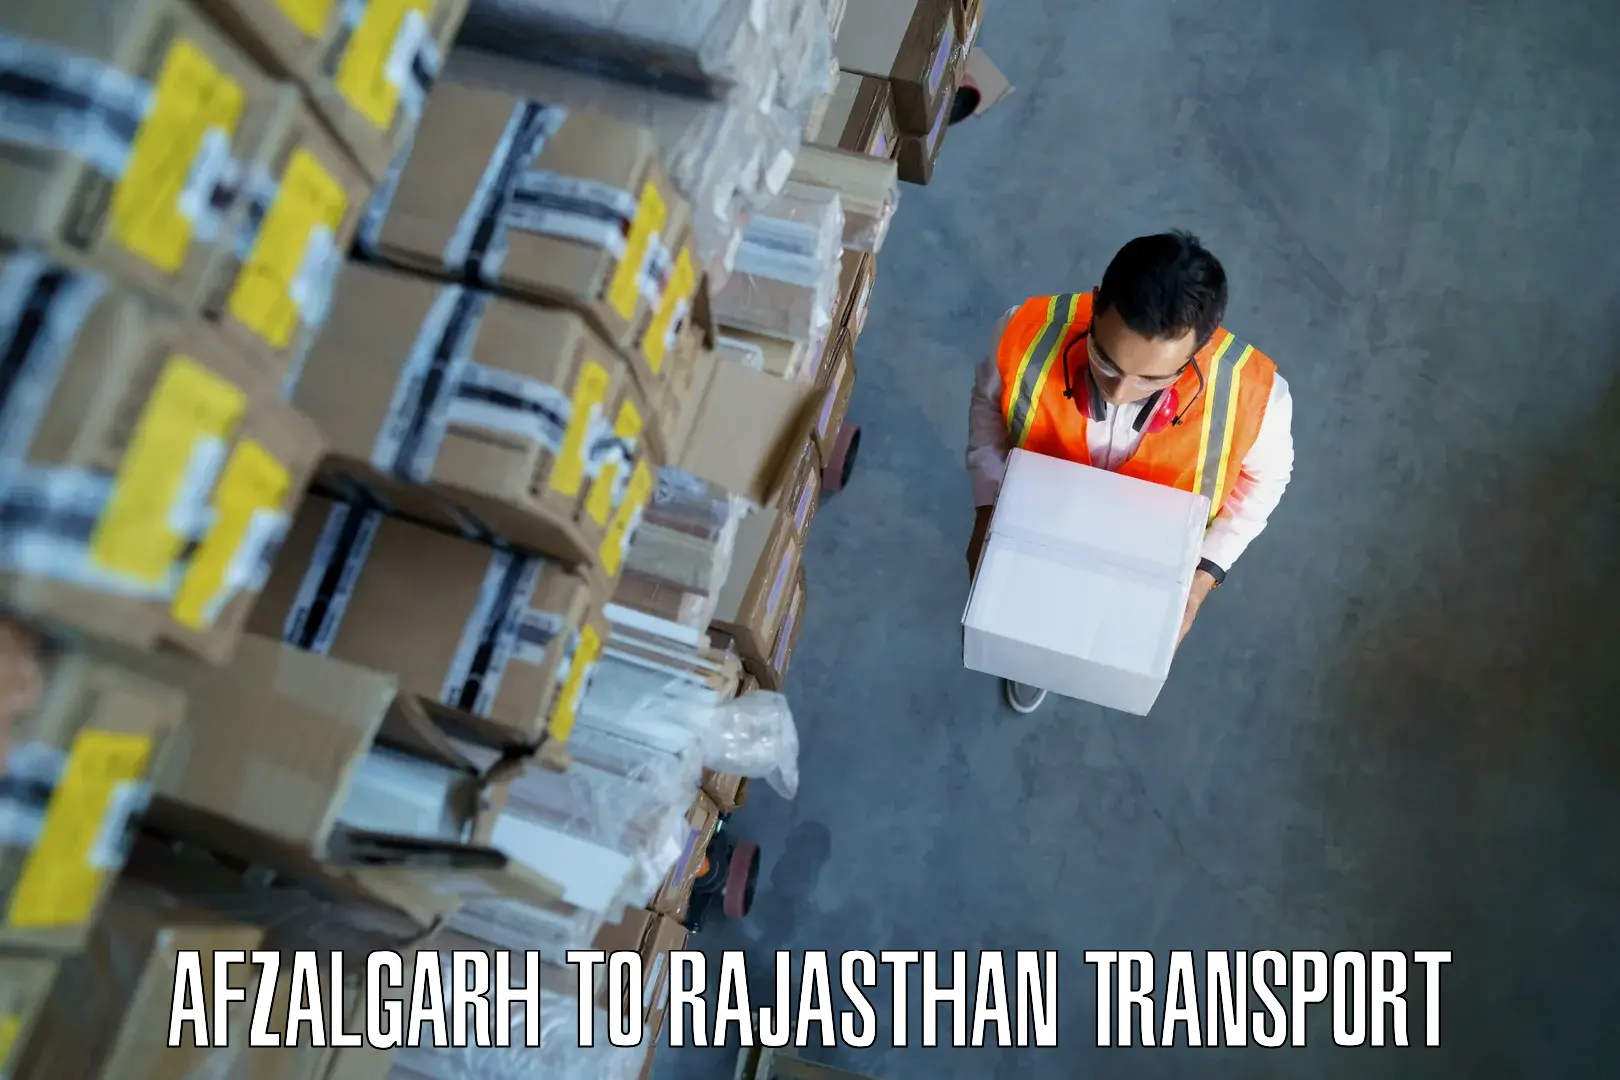 Truck transport companies in India Afzalgarh to Piparcity